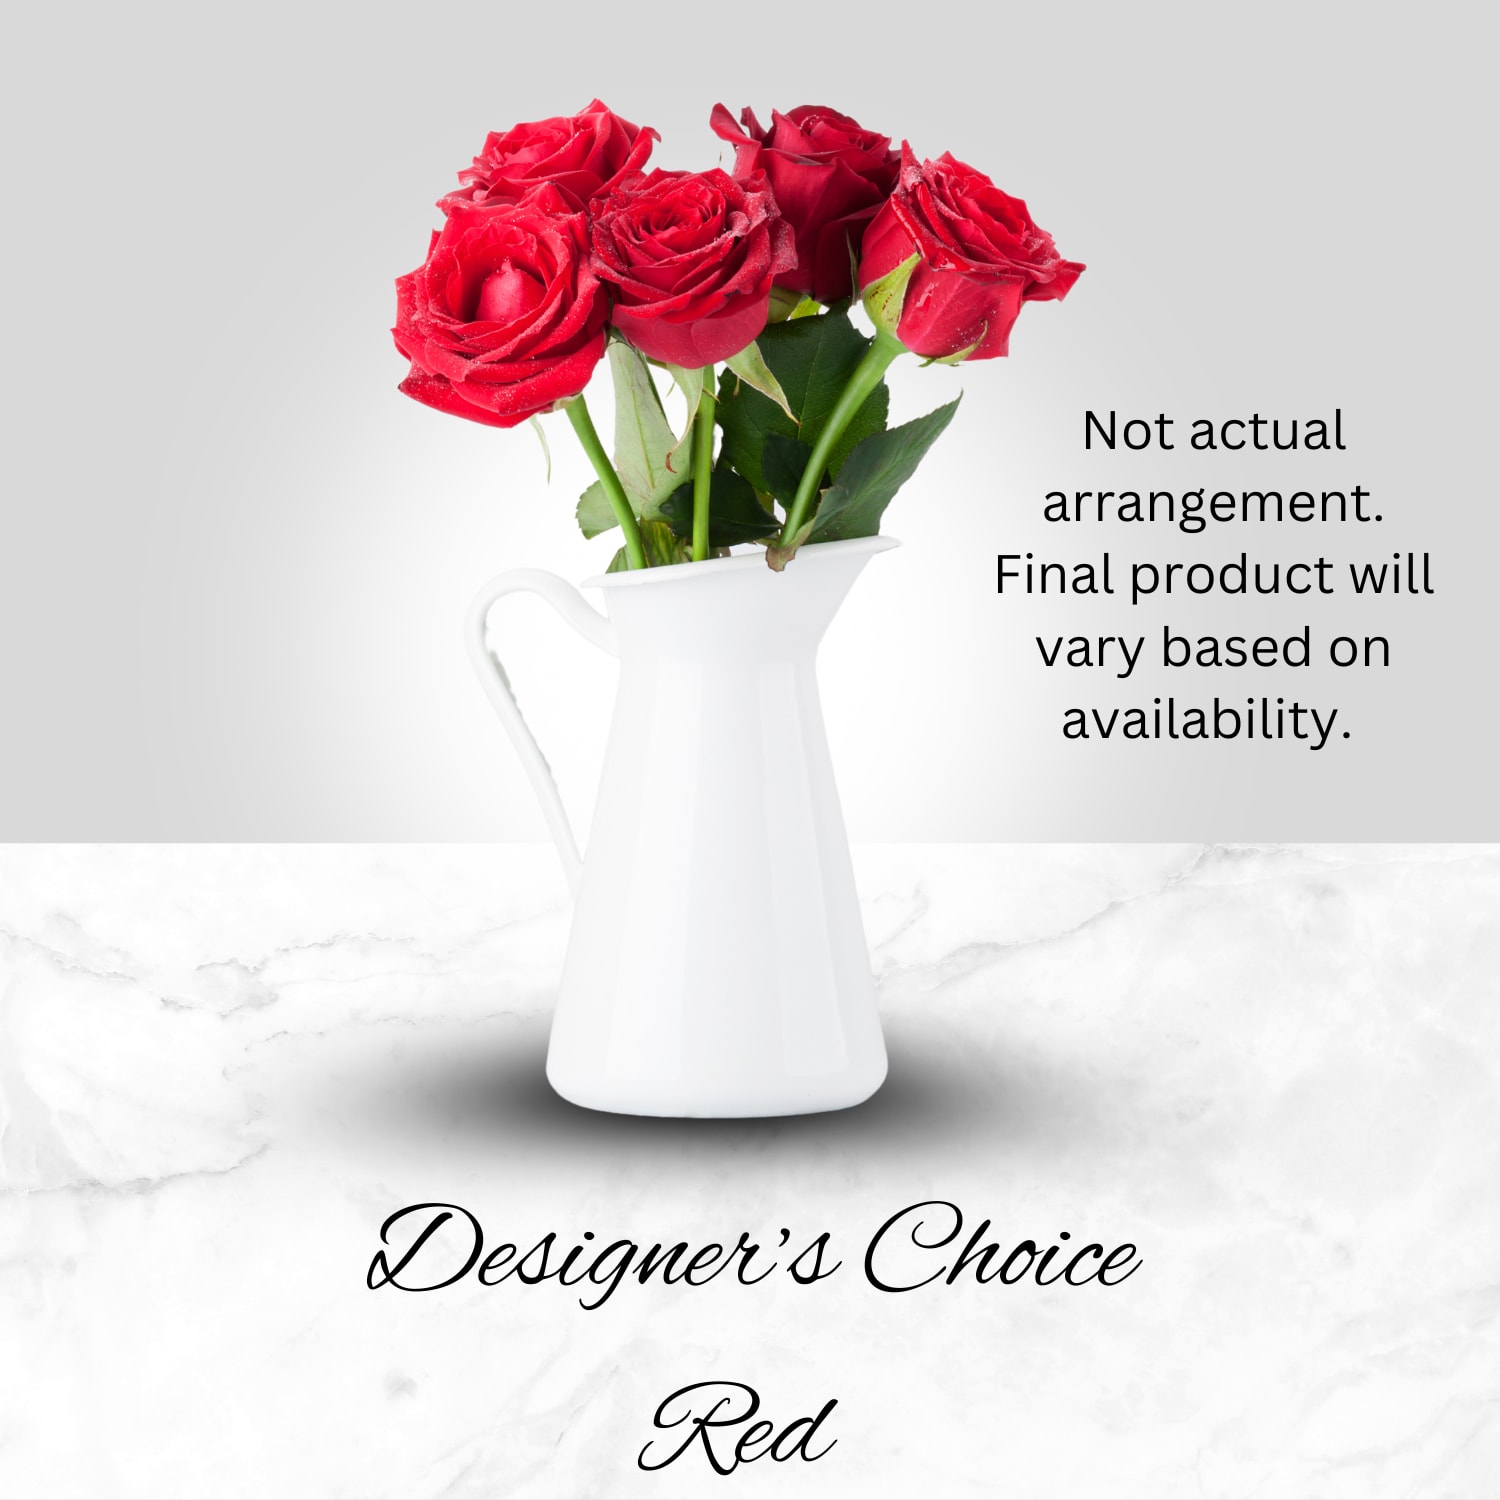 Red Designer's Choice - This arrangement will feature red as the dominant color with other beautiful colors to compliment it. This deep color of love is sure to delight! Finished product will vary depending on availability. It will be bigger and fuller than picture with different vase.